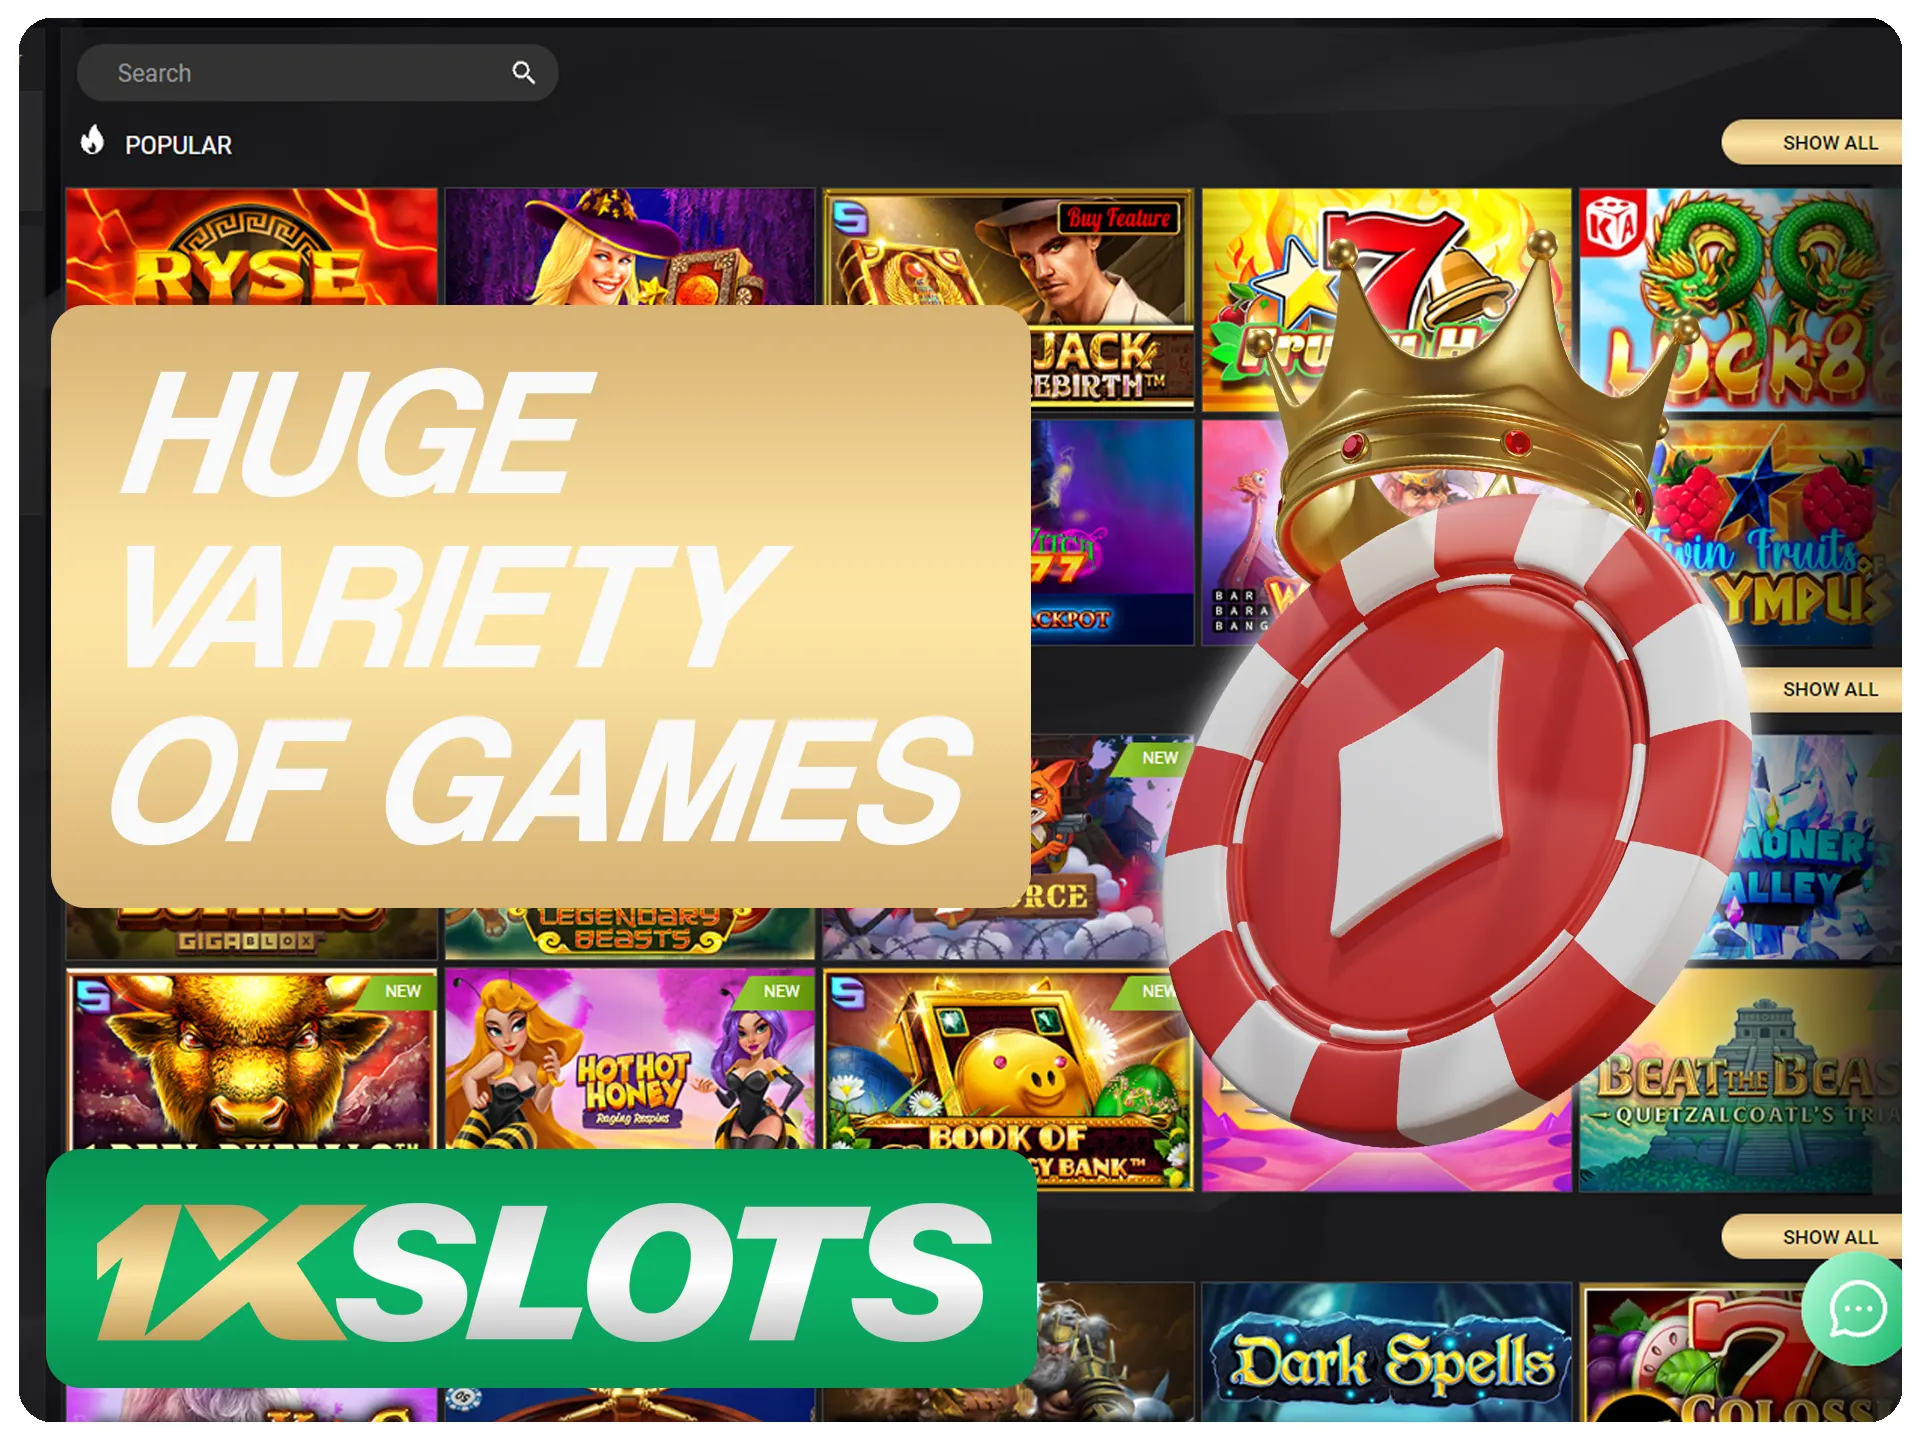 Search for your favourite games at 1xSlots.